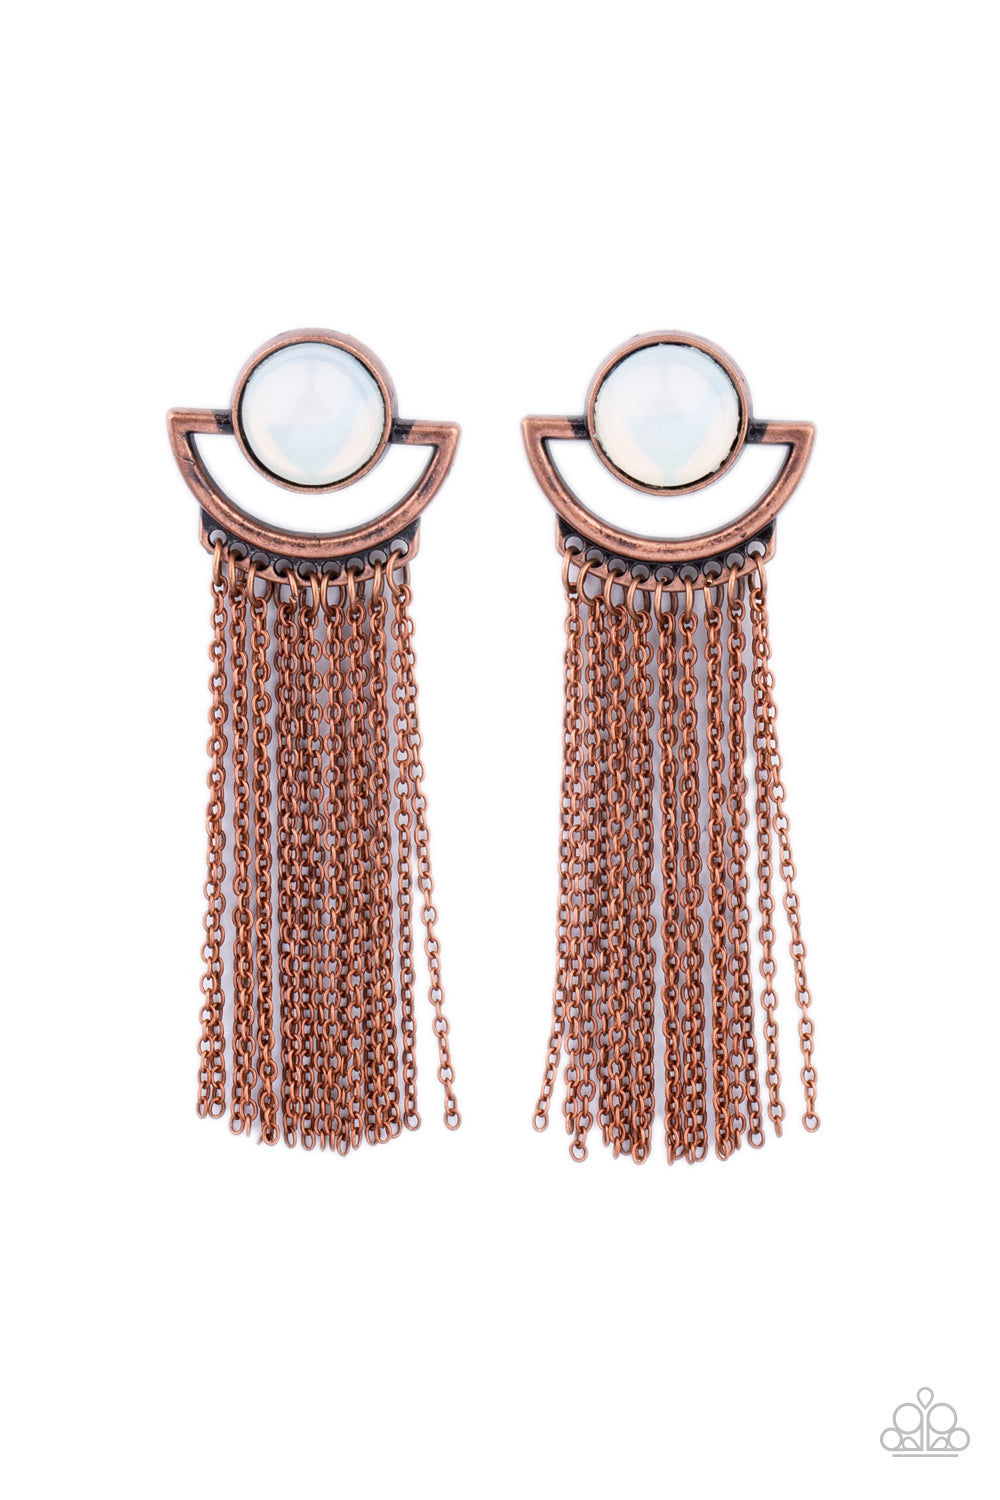 Paparazzi Accessories Opal Oracle - Copper Post Earrings a curtain of dainty copper chains stream from the bottom of a rustic crescent shaped copper frame that is dotted in a dewy opal bead for a mystical finish. Earring attaches to a standard post fitting.